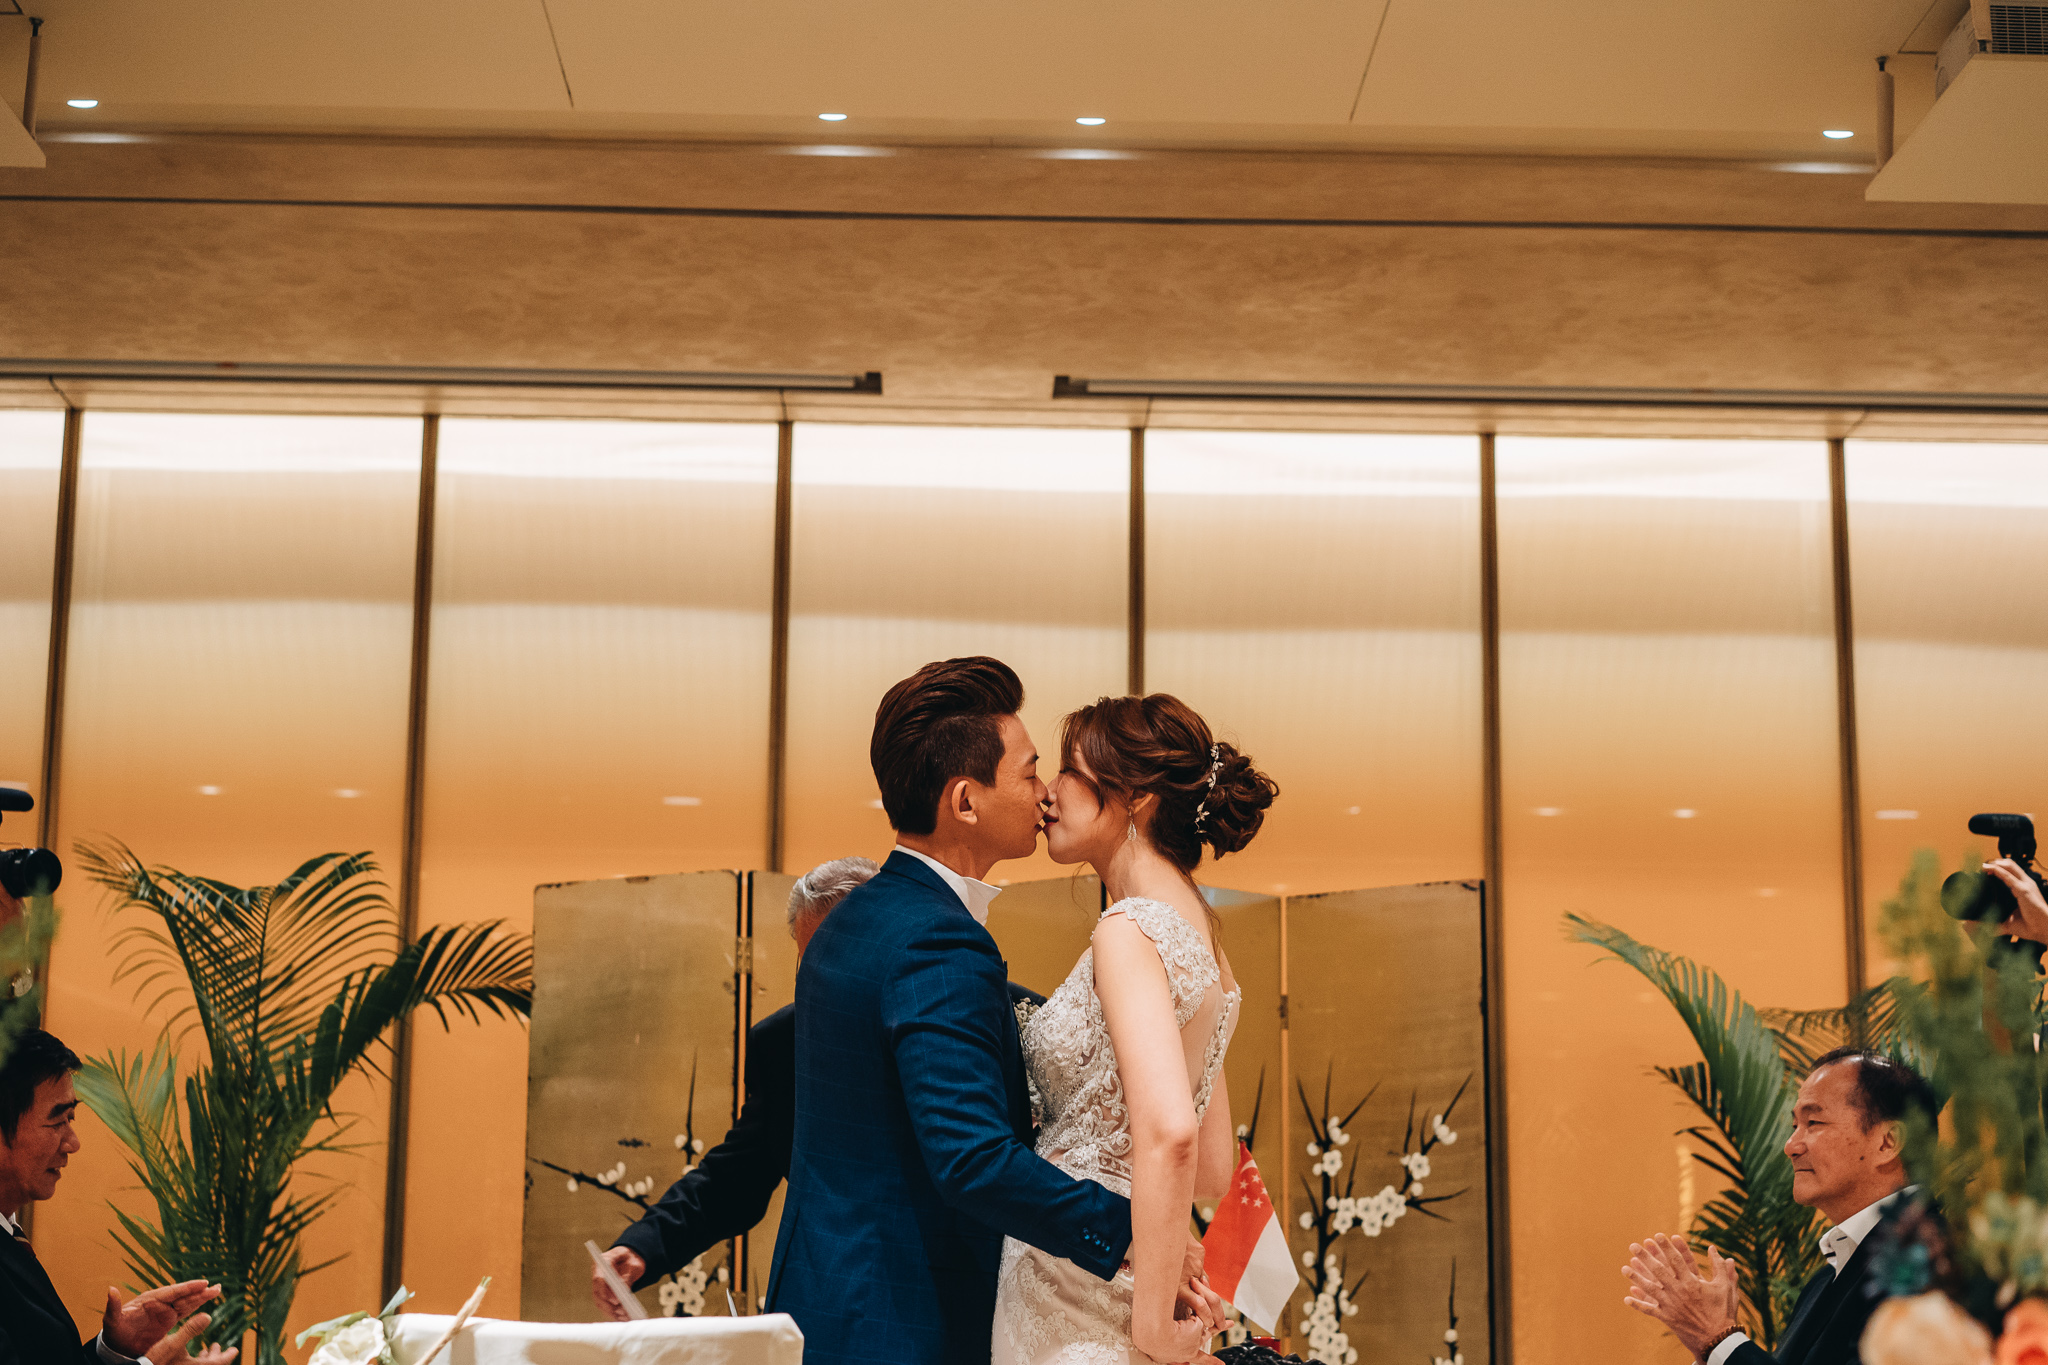 Cindy & Kevin Wedding Day Highlights (resized for sharing) - 159.jpg